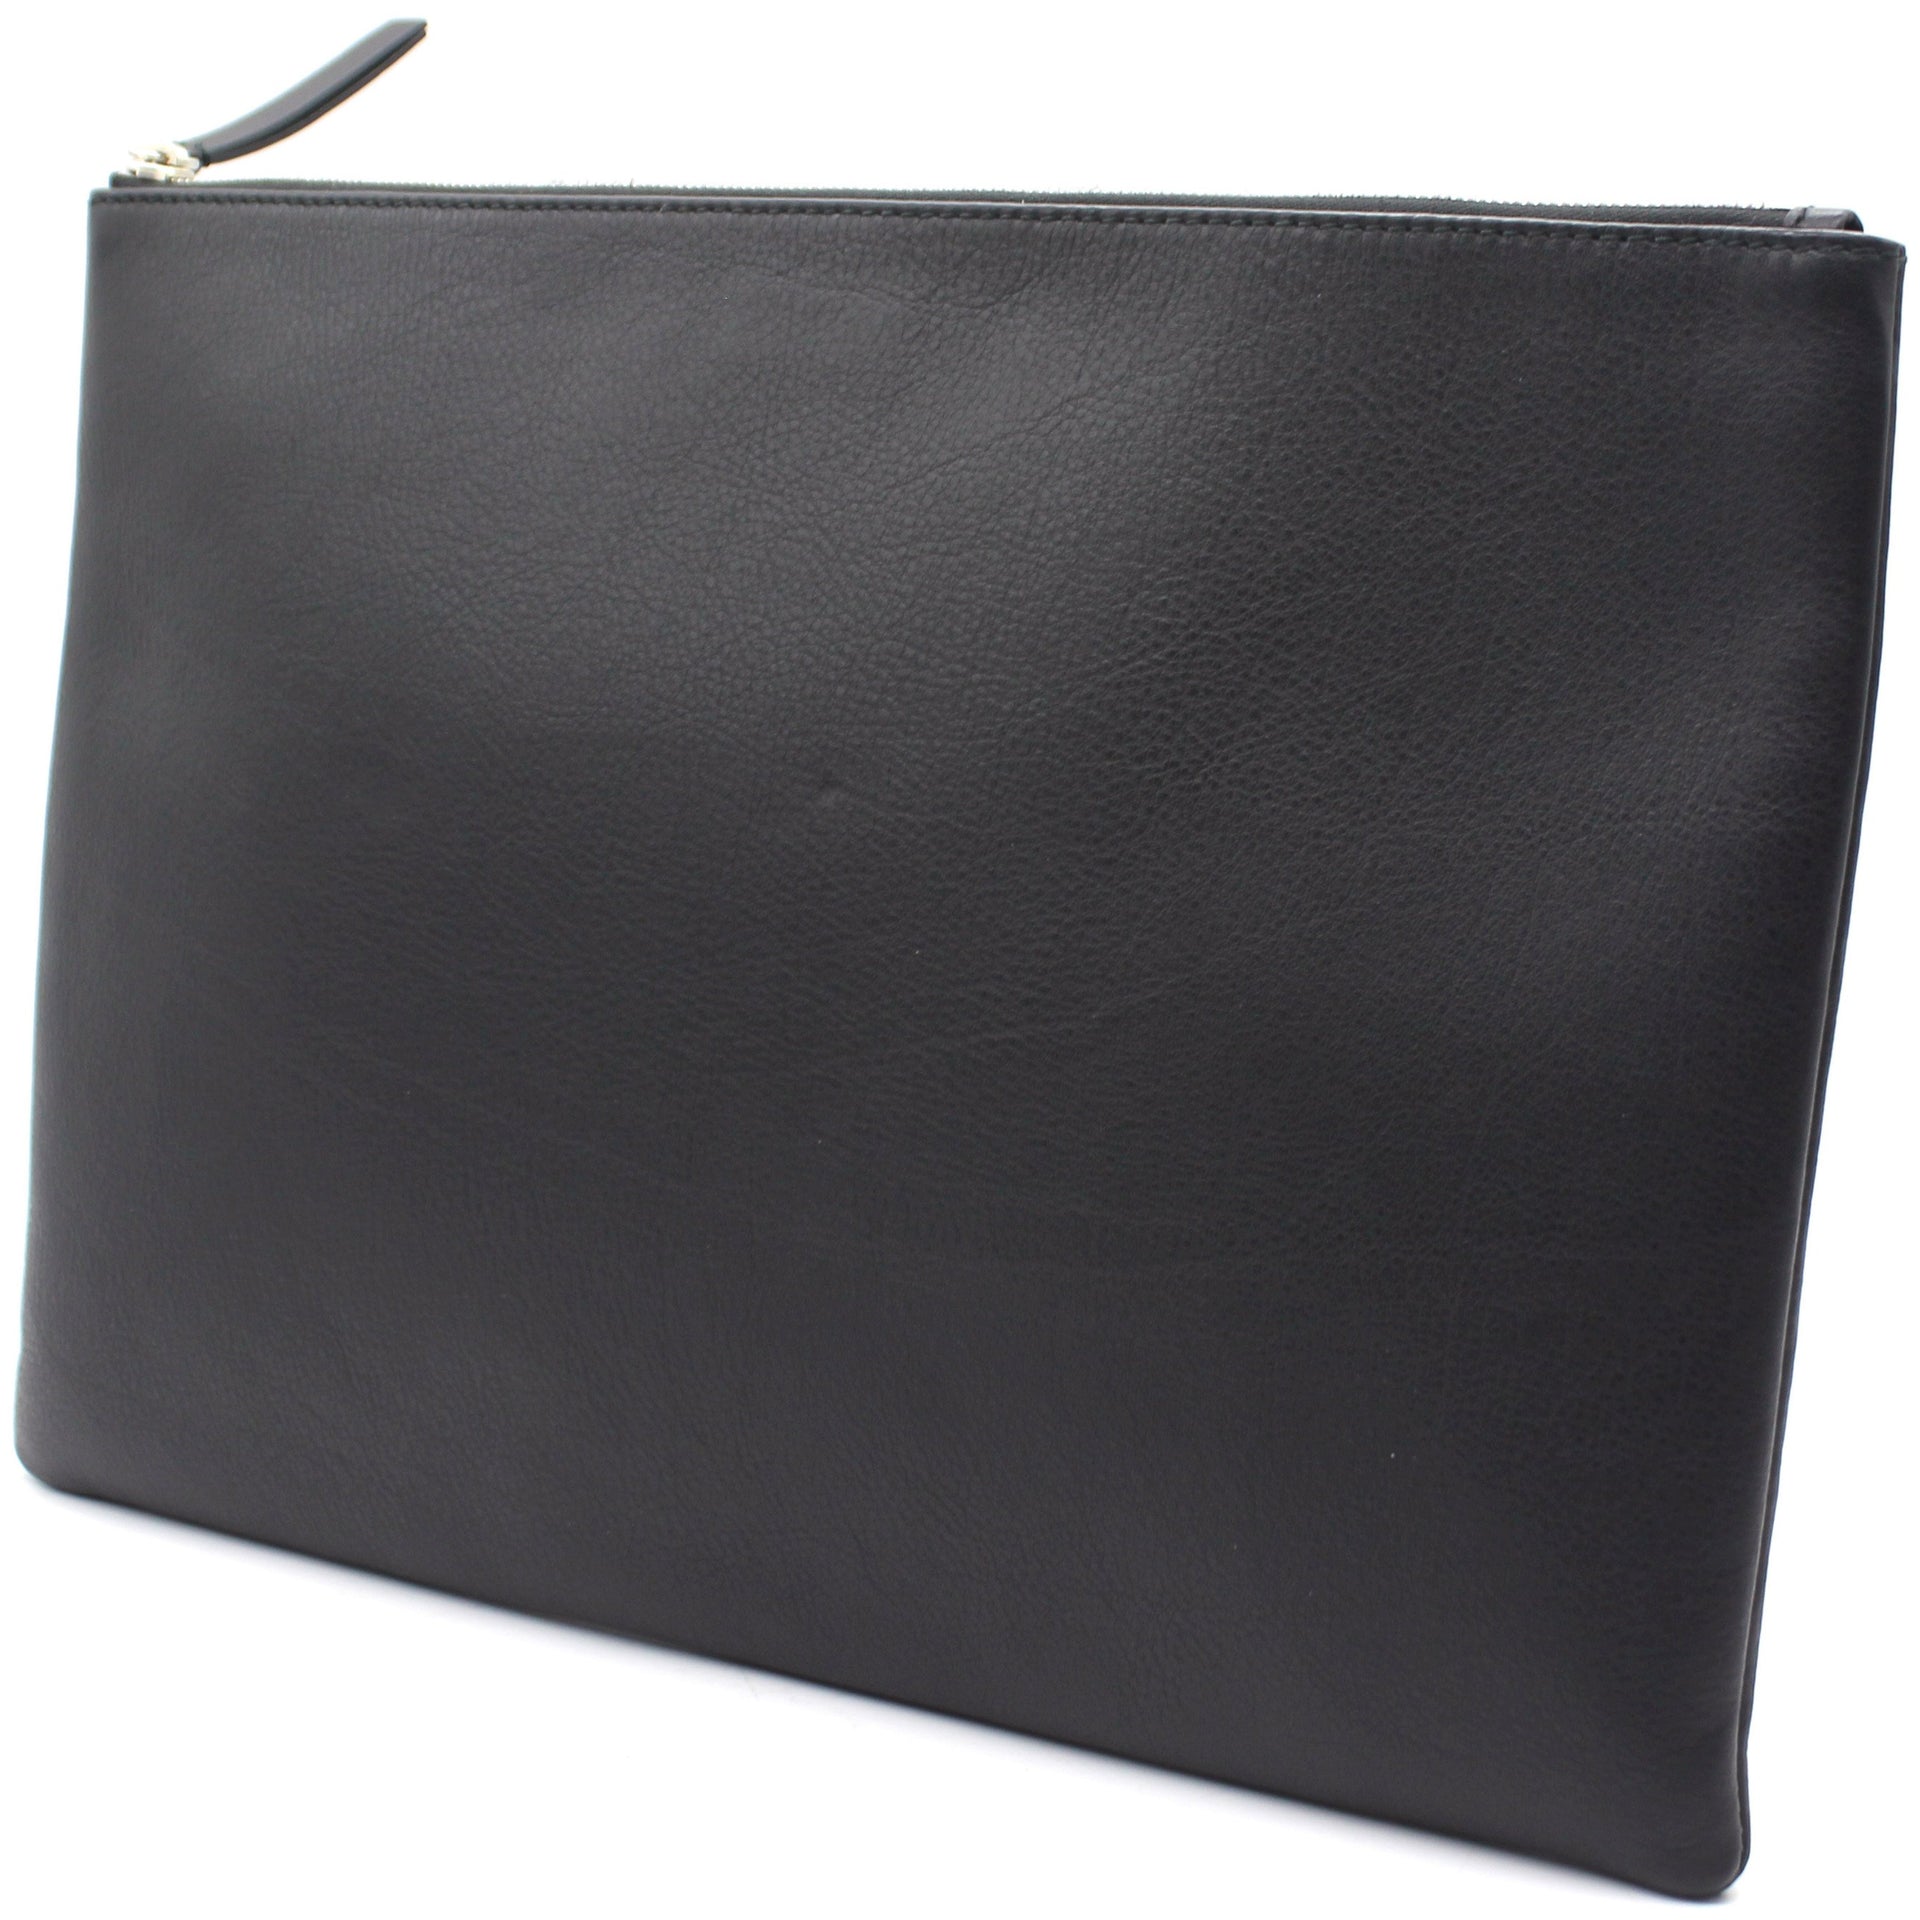 Embossed Logo Everyday Large Clutch